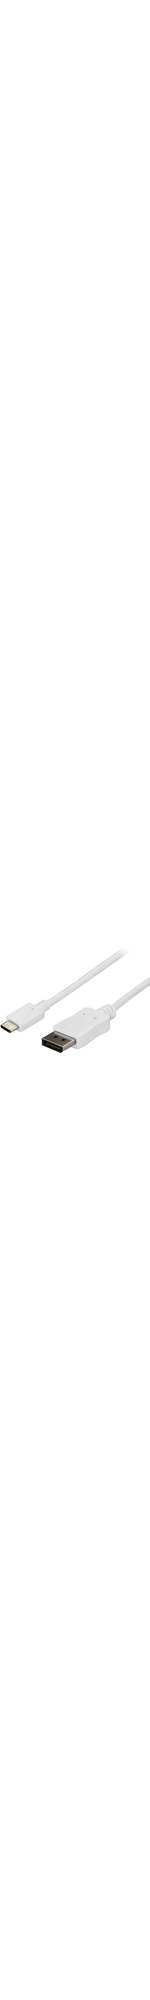 StarTech.com 6ft USB C to DisplayPort Cable - White - 4K 60Hz DisplayPort Cable - USB Type C to DisplayPort Adapter CDP2DPMM6W - 6 ft. USB C to DisplayPort cable a